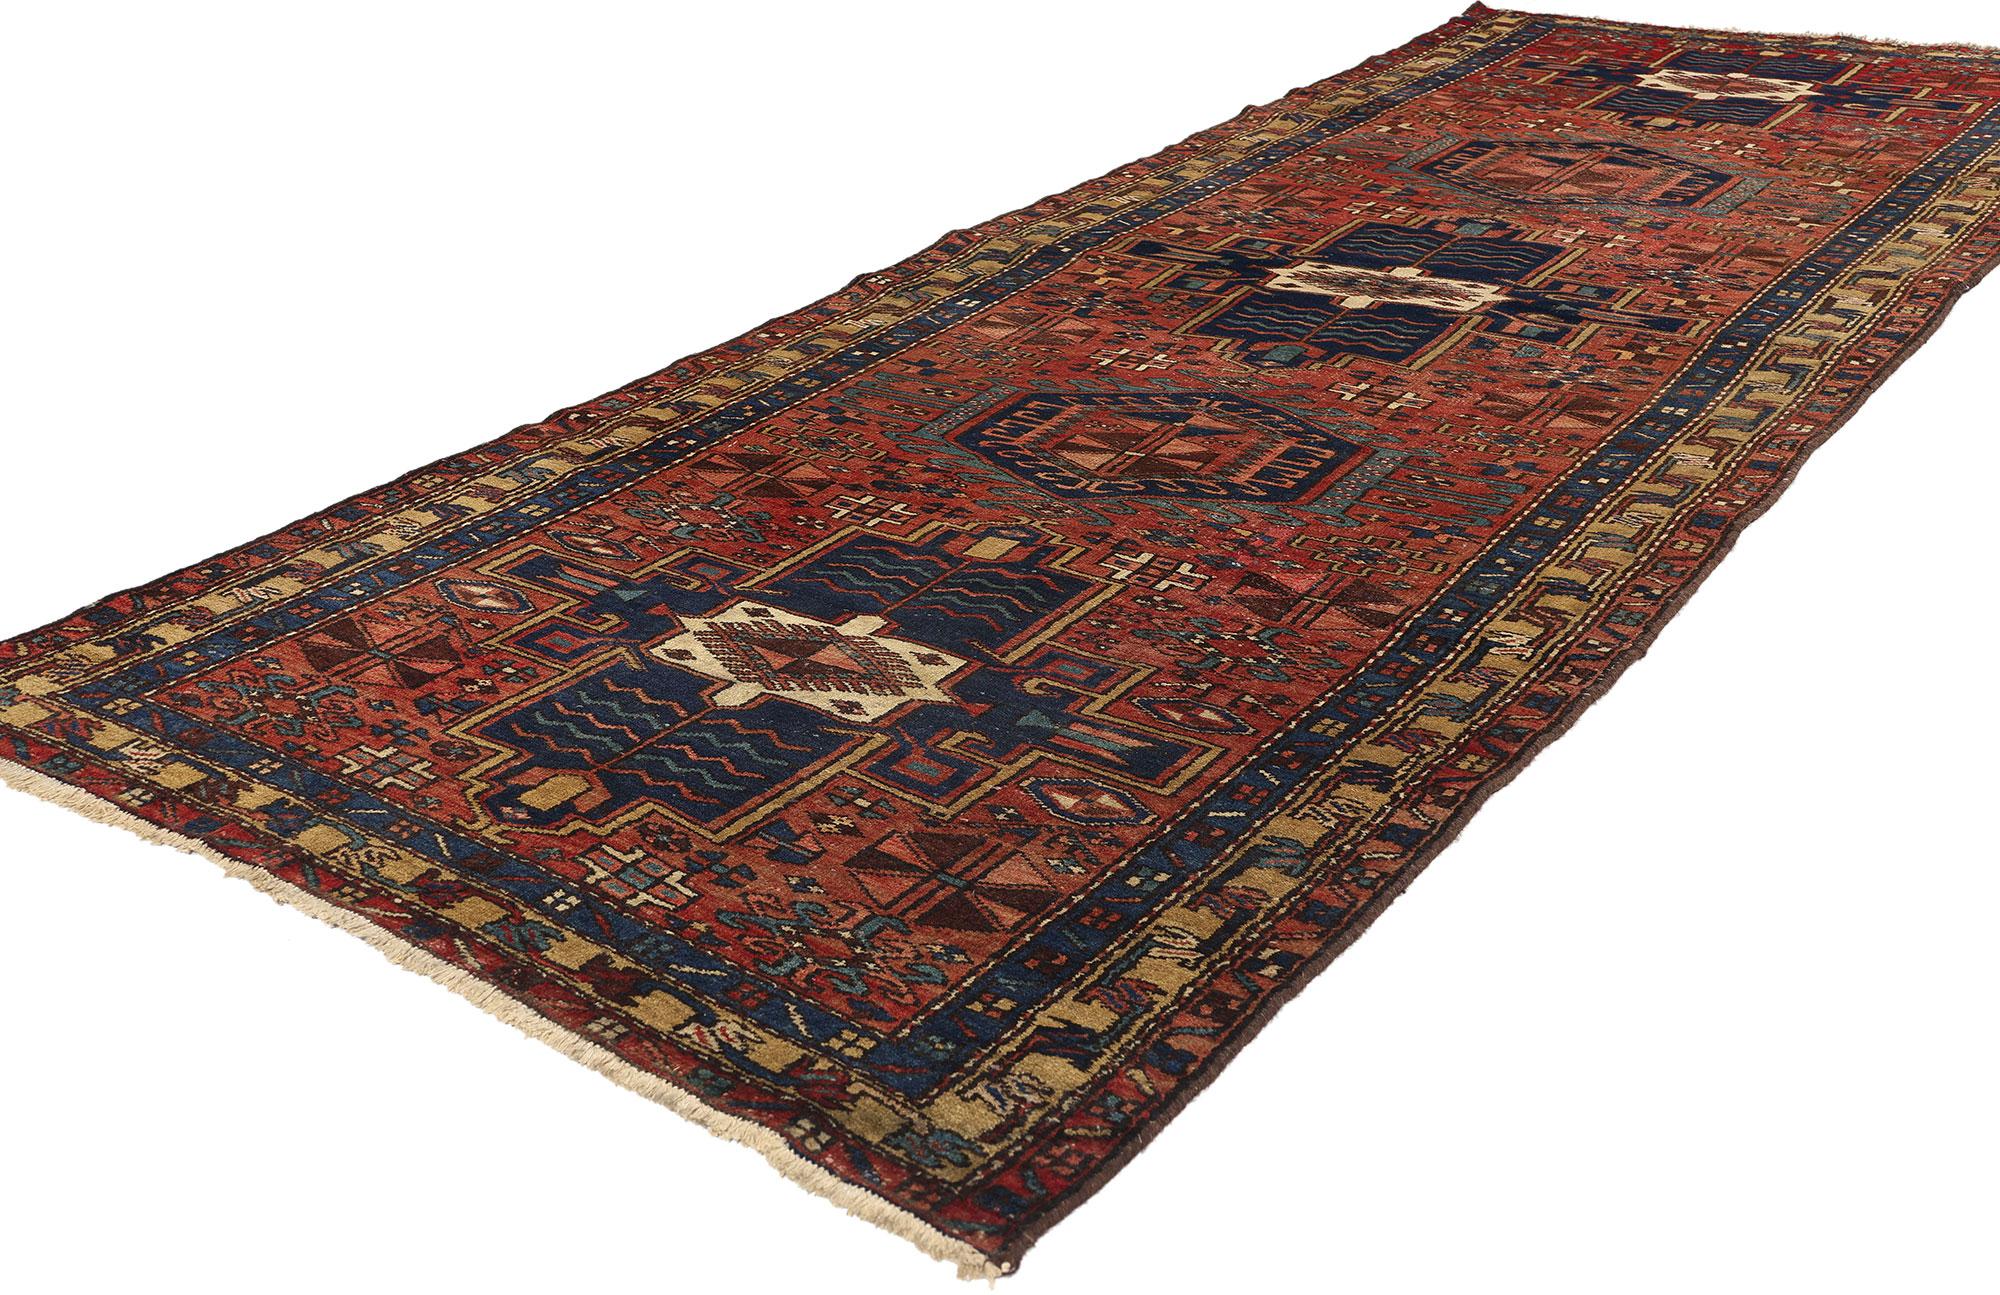 76359 Vintage Persian Azerbaijan Rug Runner, 03'09 x 10'10. This hand-knotted wool vintage Persian Azerbaijan runner stands as a testament to exquisite craftsmanship and timeless design. Resonating with elements reminiscent of Caucasian rugs, it